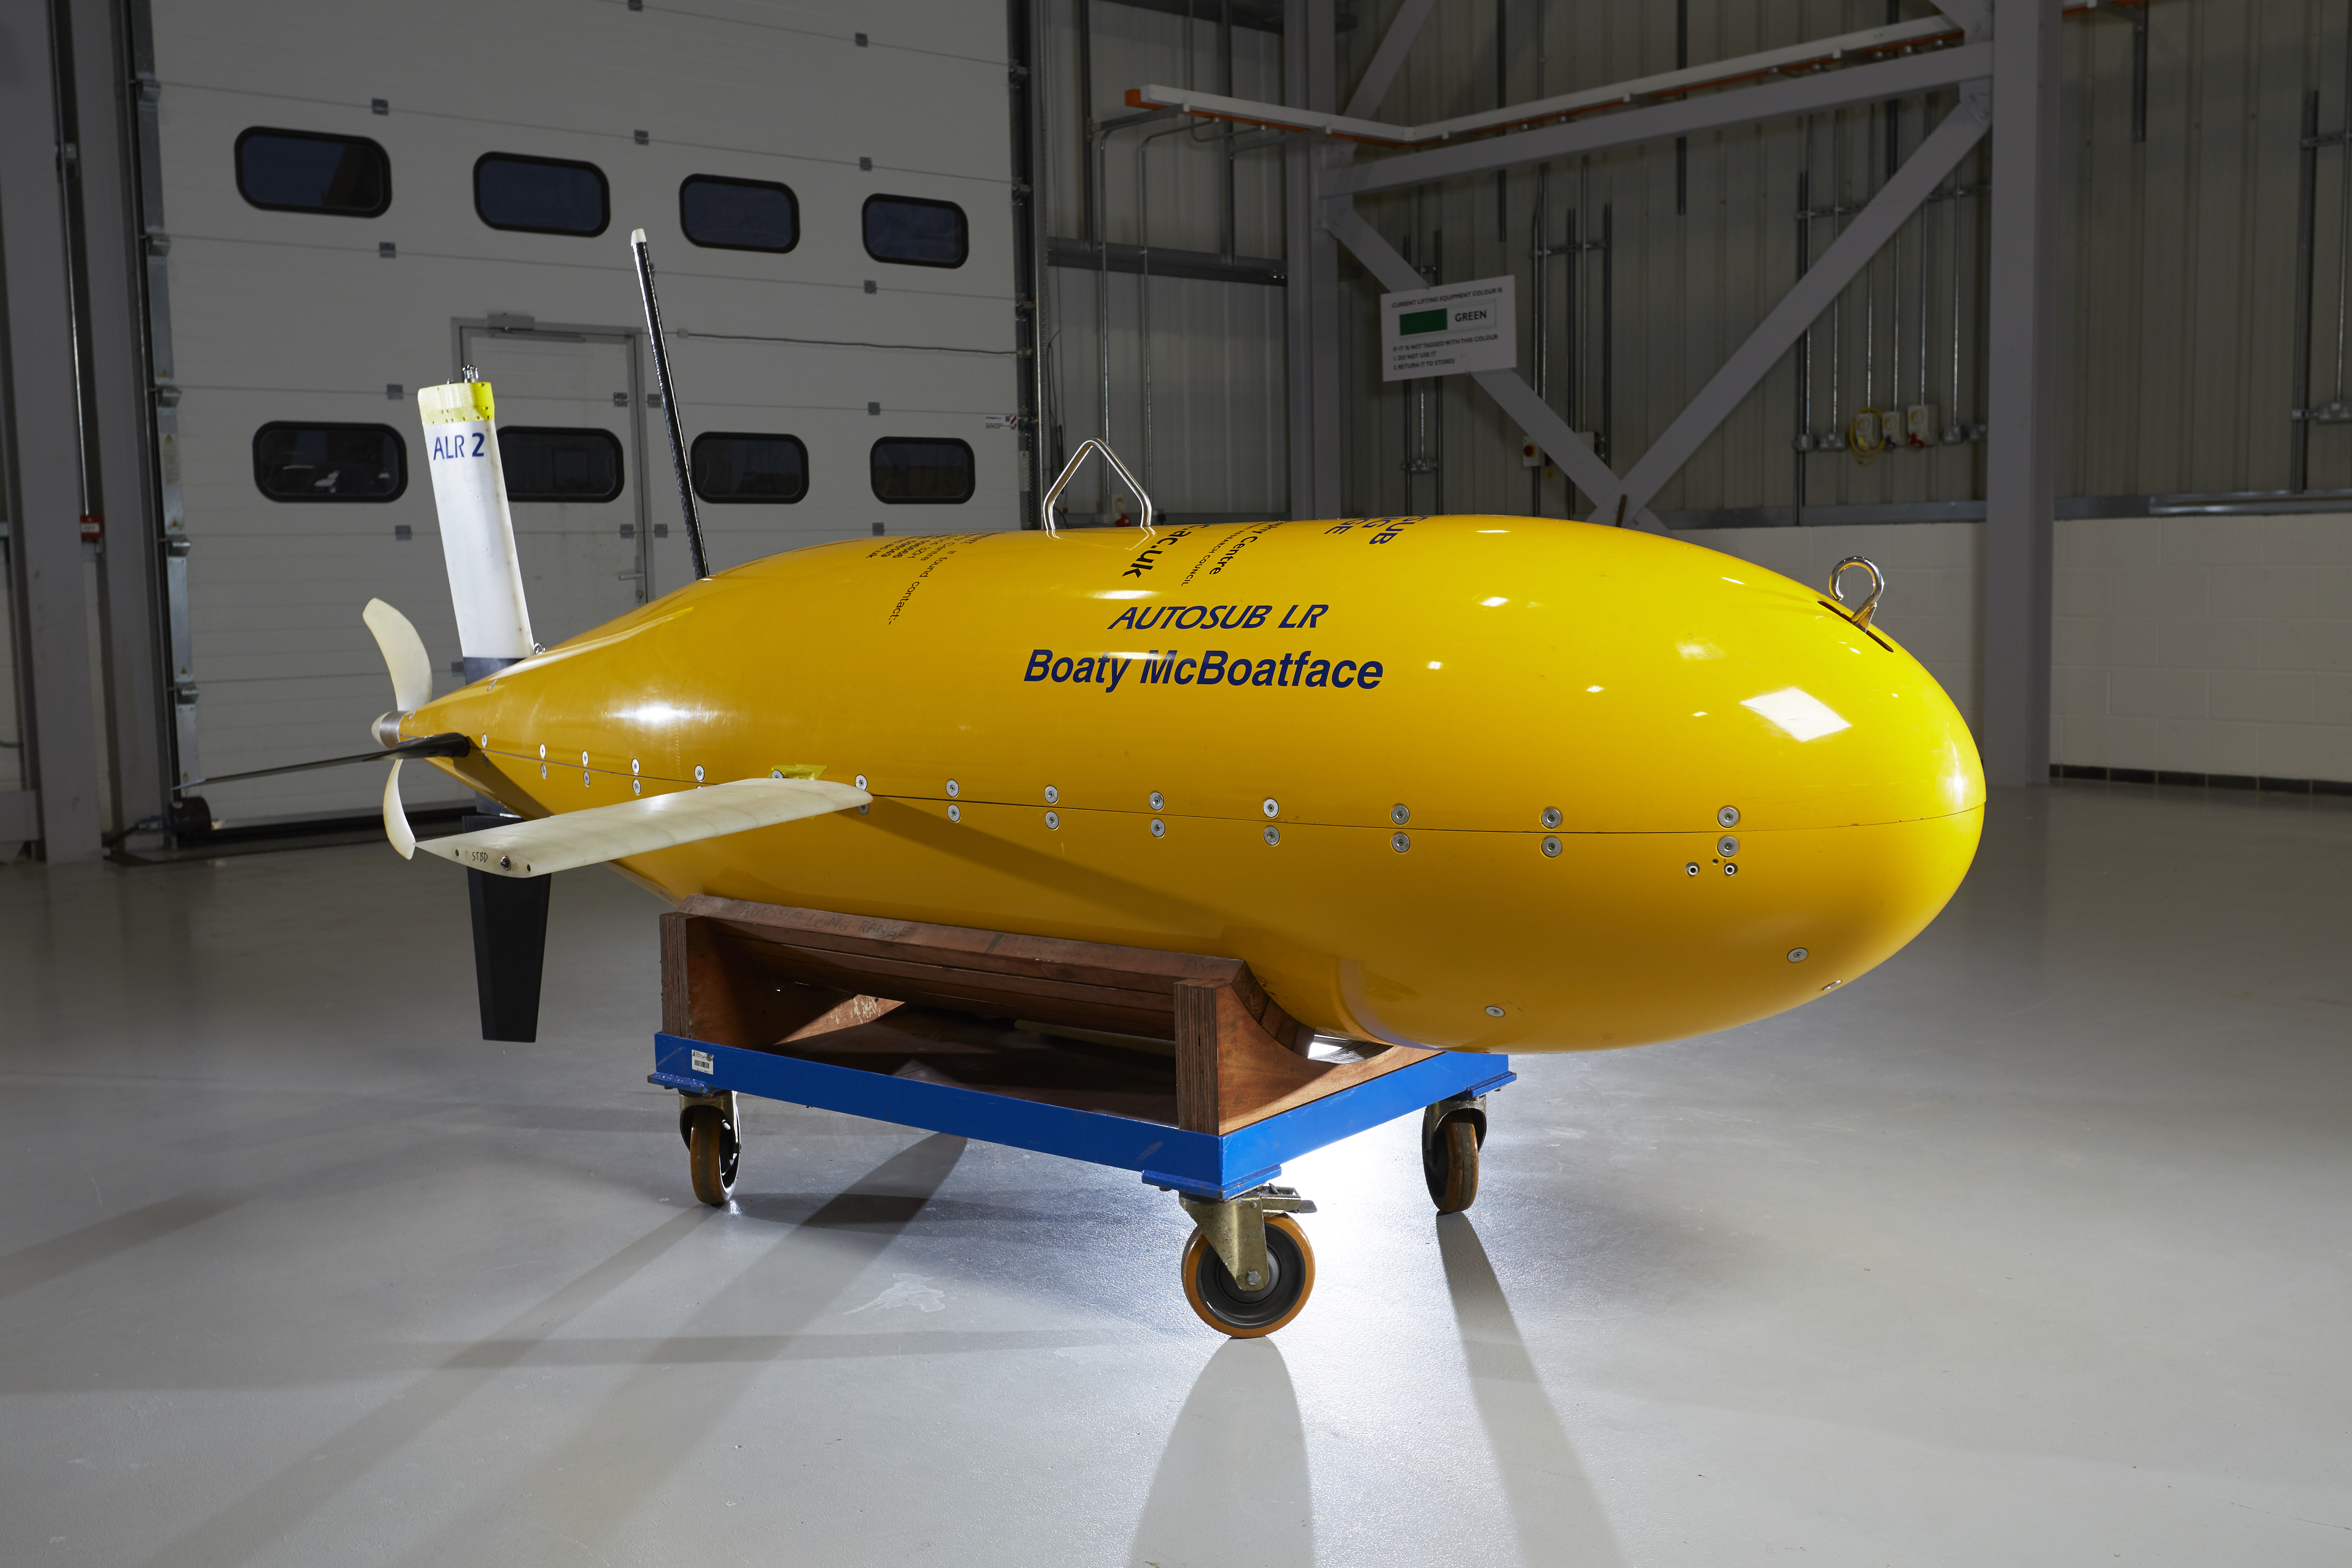 In an undated handout photo, Boaty McBoatface, a remotely-operated submarine. The submarine, bearing a name that began as a joke, will begin its first mission this week in Antarctica. (National Oceanography Center via The New York Times)